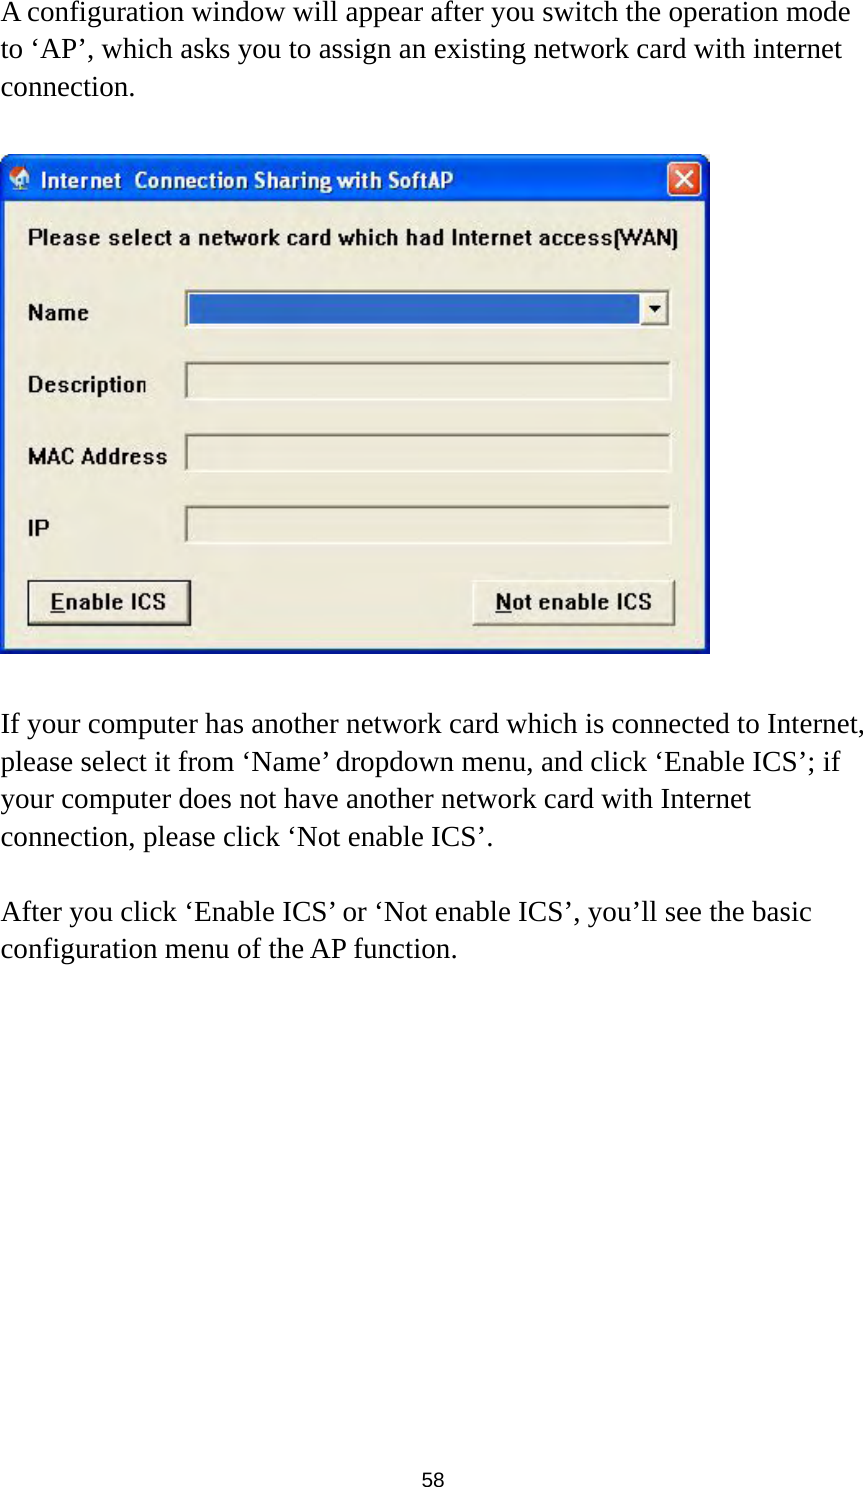  58 A configuration window will appear after you switch the operation mode to ‘AP’, which asks you to assign an existing network card with internet connection.    If your computer has another network card which is connected to Internet, please select it from ‘Name’ dropdown menu, and click ‘Enable ICS’; if your computer does not have another network card with Internet connection, please click ‘Not enable ICS’.      After you click ‘Enable ICS’ or ‘Not enable ICS’, you’ll see the basic configuration menu of the AP function.  